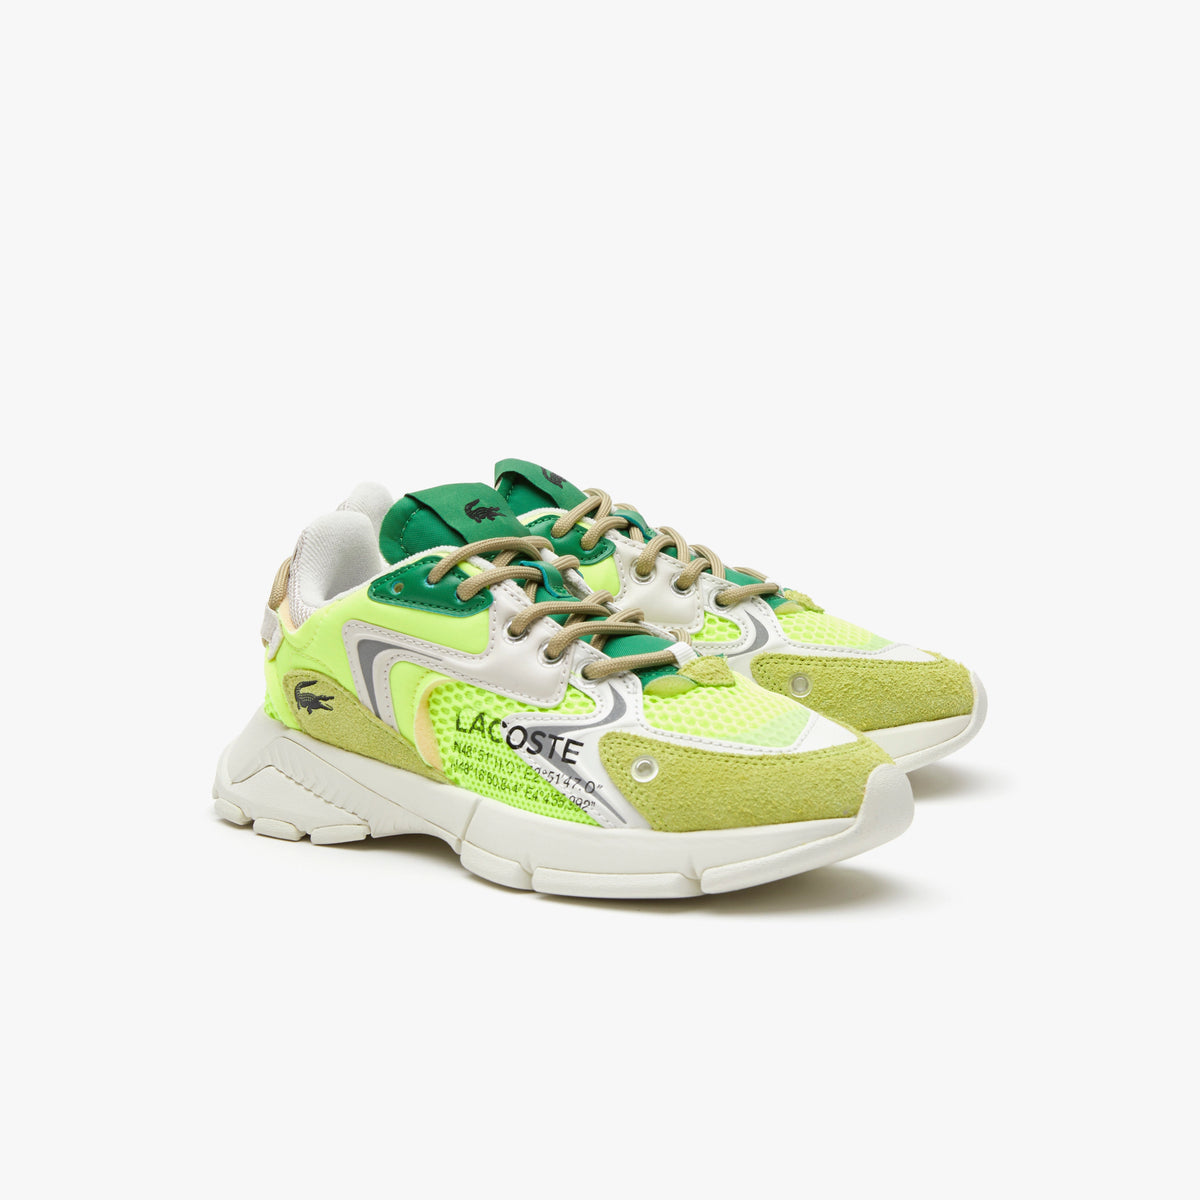 Lacoste - L003 Neo Textile Sneakers - Yellow/Off White